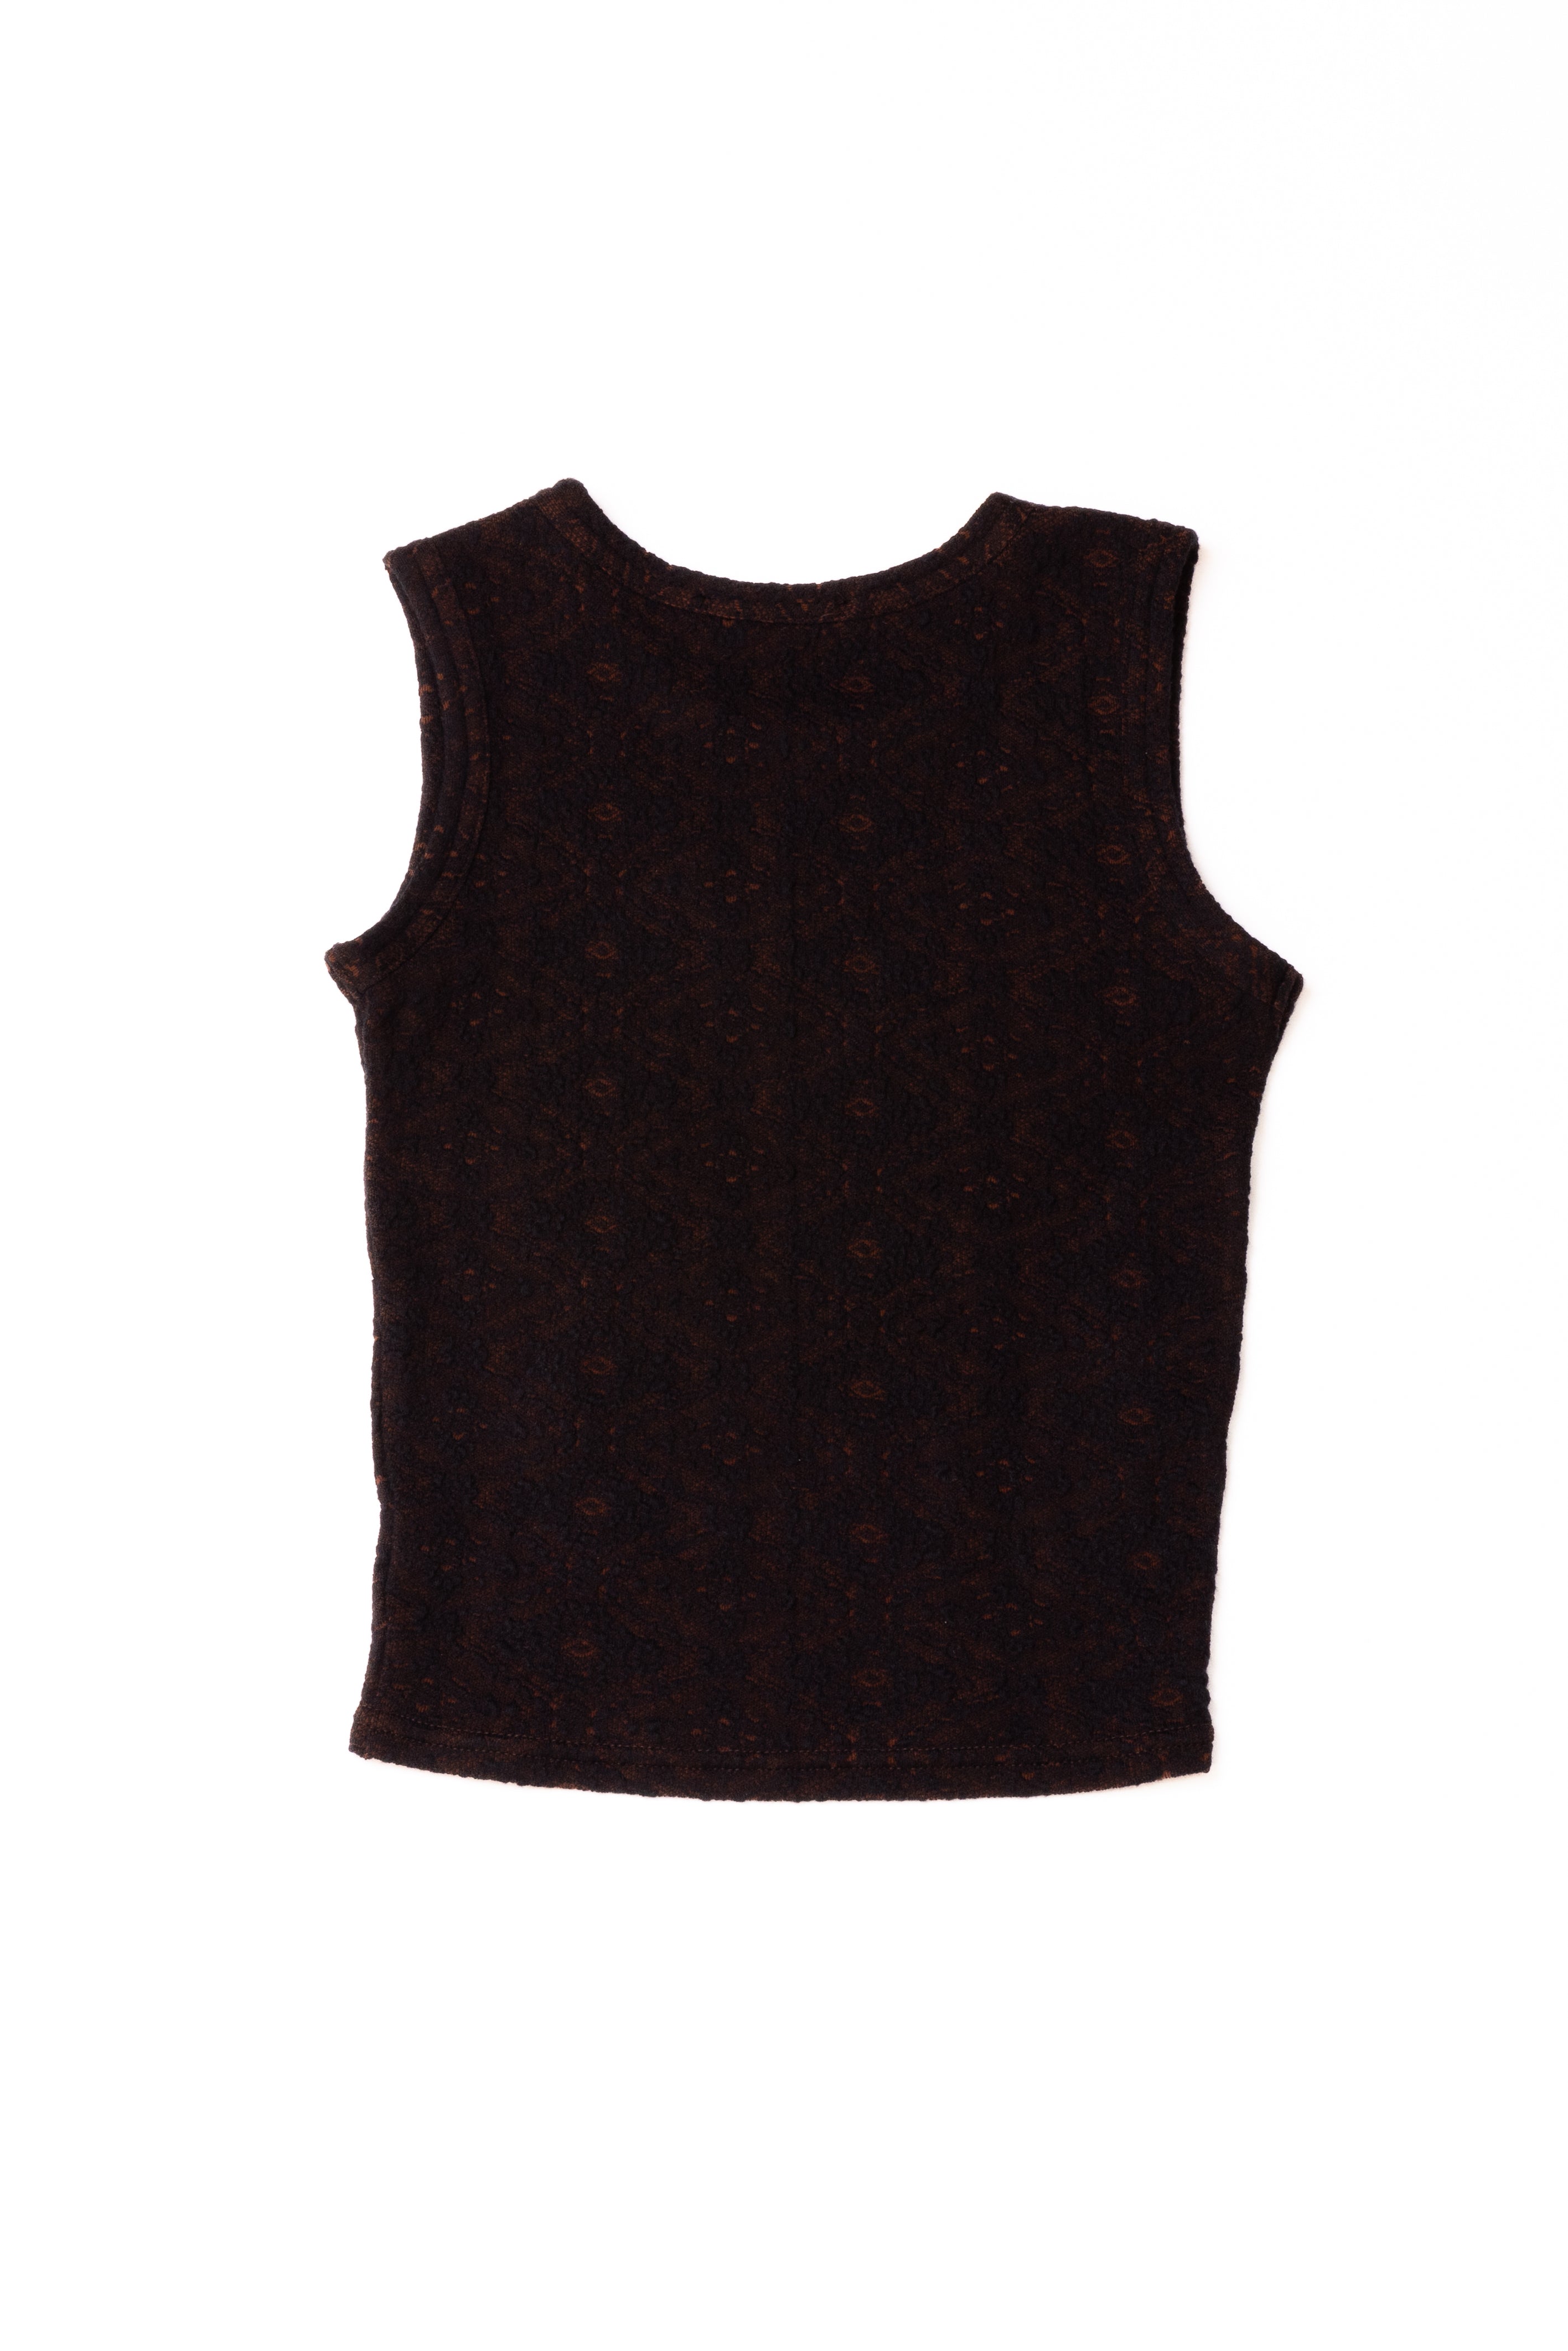 DIRTY LACE TANK | BROWN